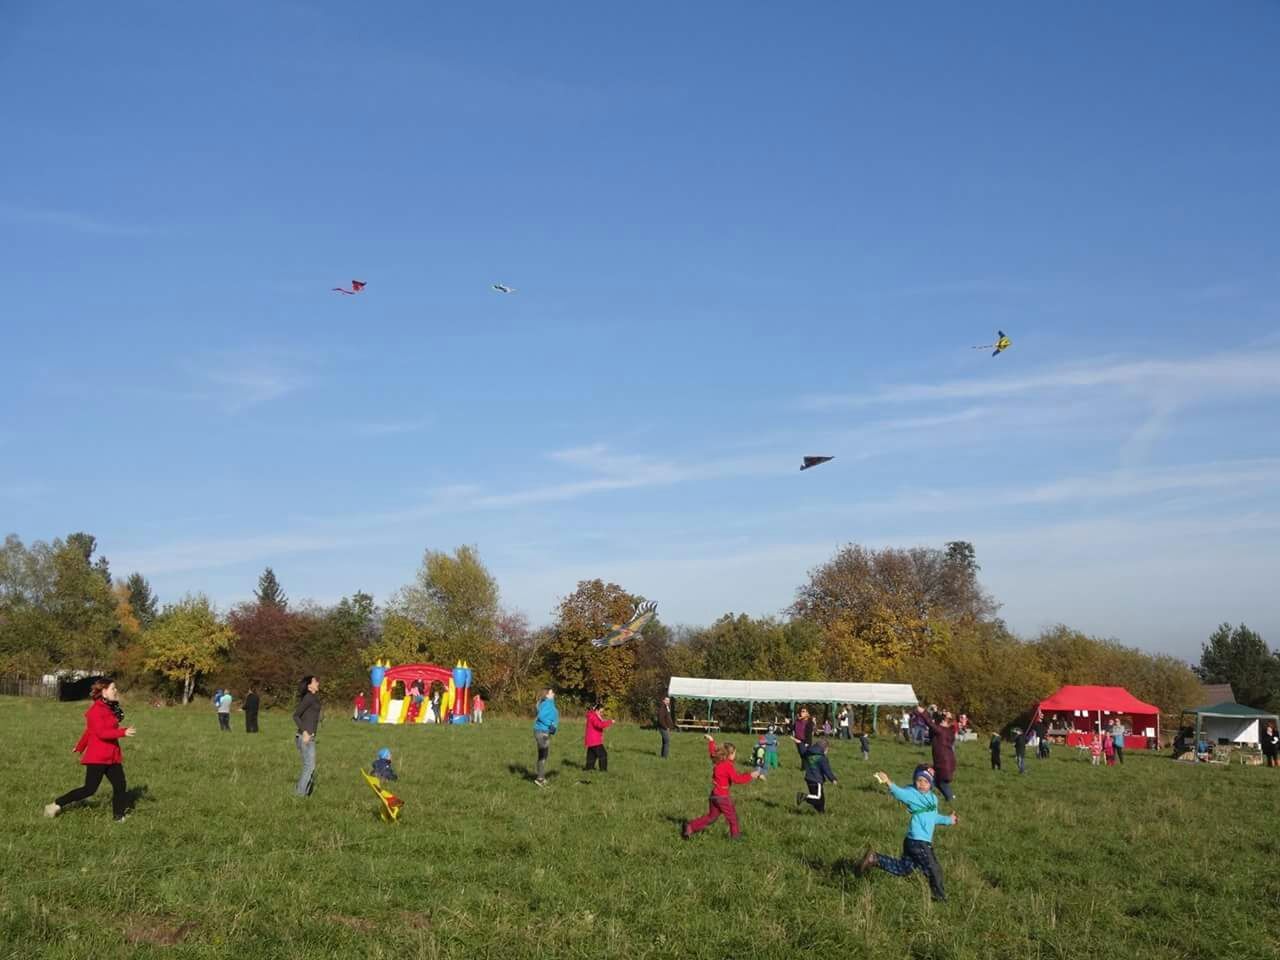 flying, leisure activity, mid-air, large group of people, lifestyles, grass, men, sky, sport, parachute, enjoyment, fun, person, landscape, tree, field, paragliding, kite, blue